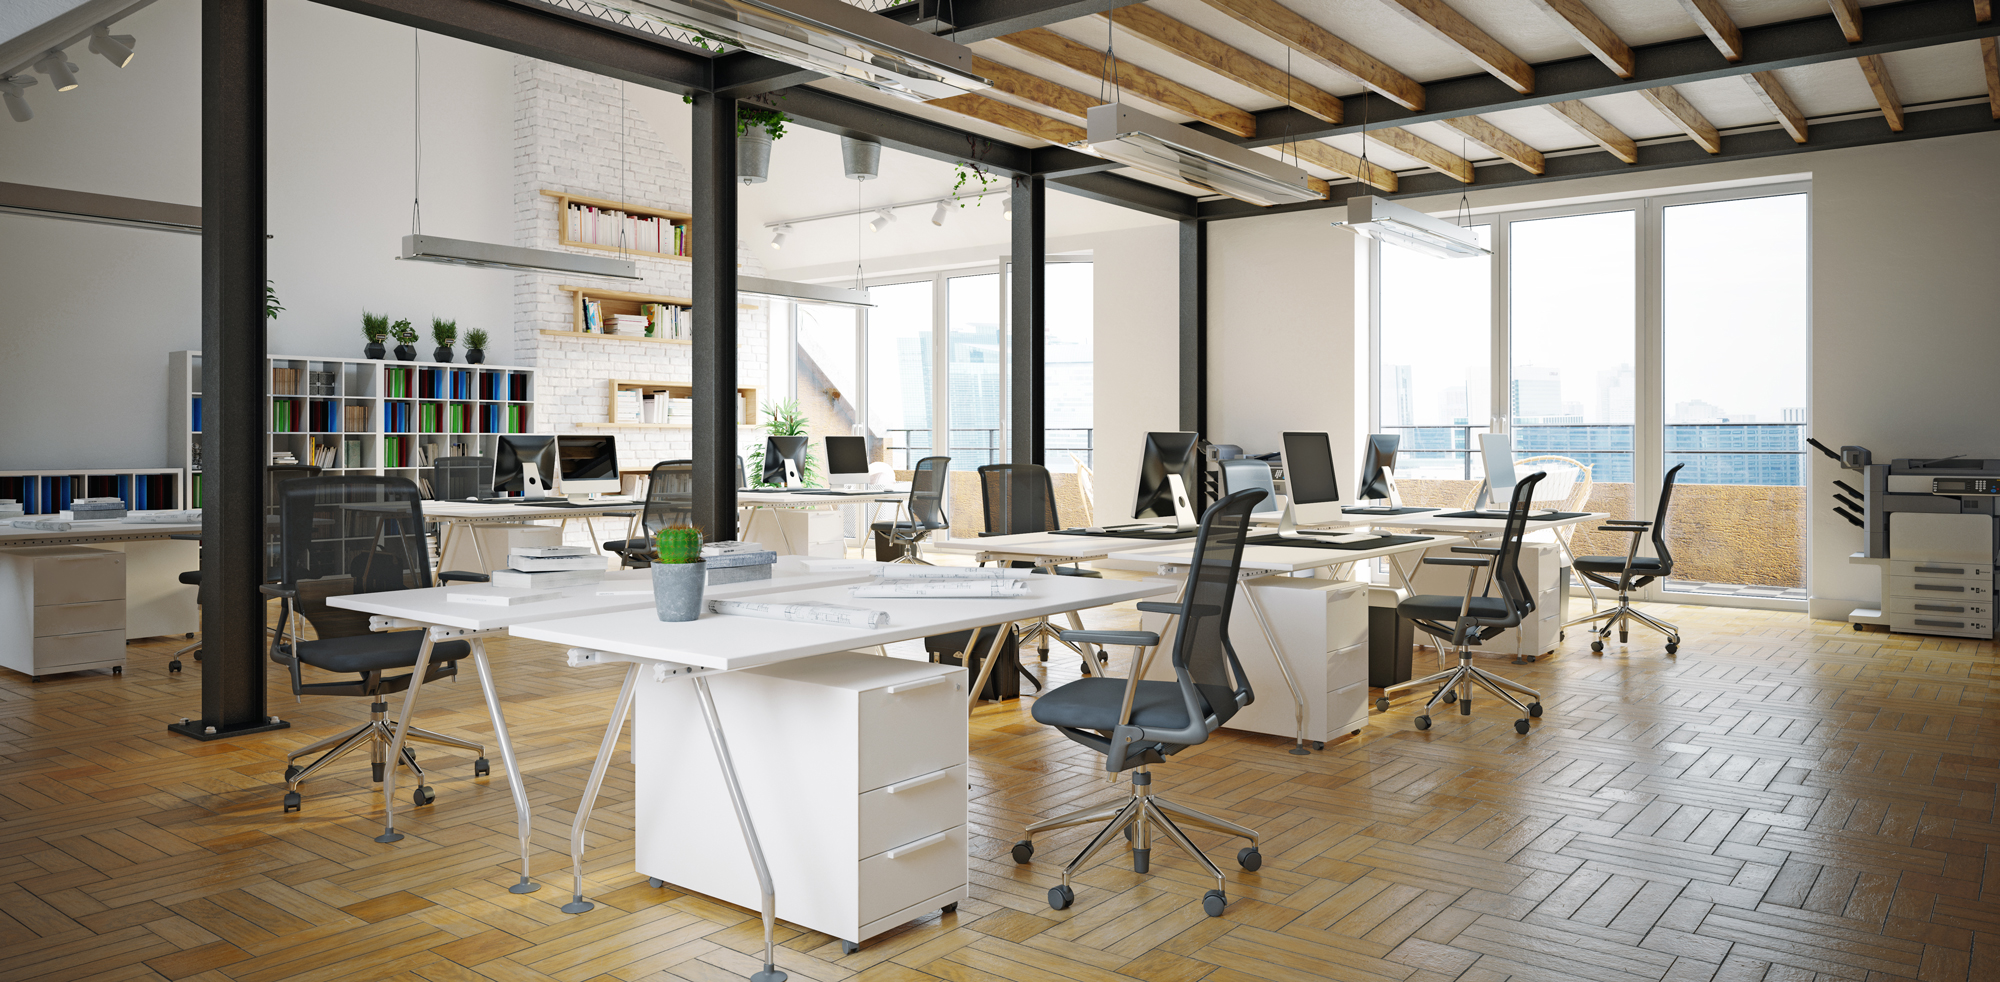 What is Coworking Office Space? And Why is it Becoming So Popular?